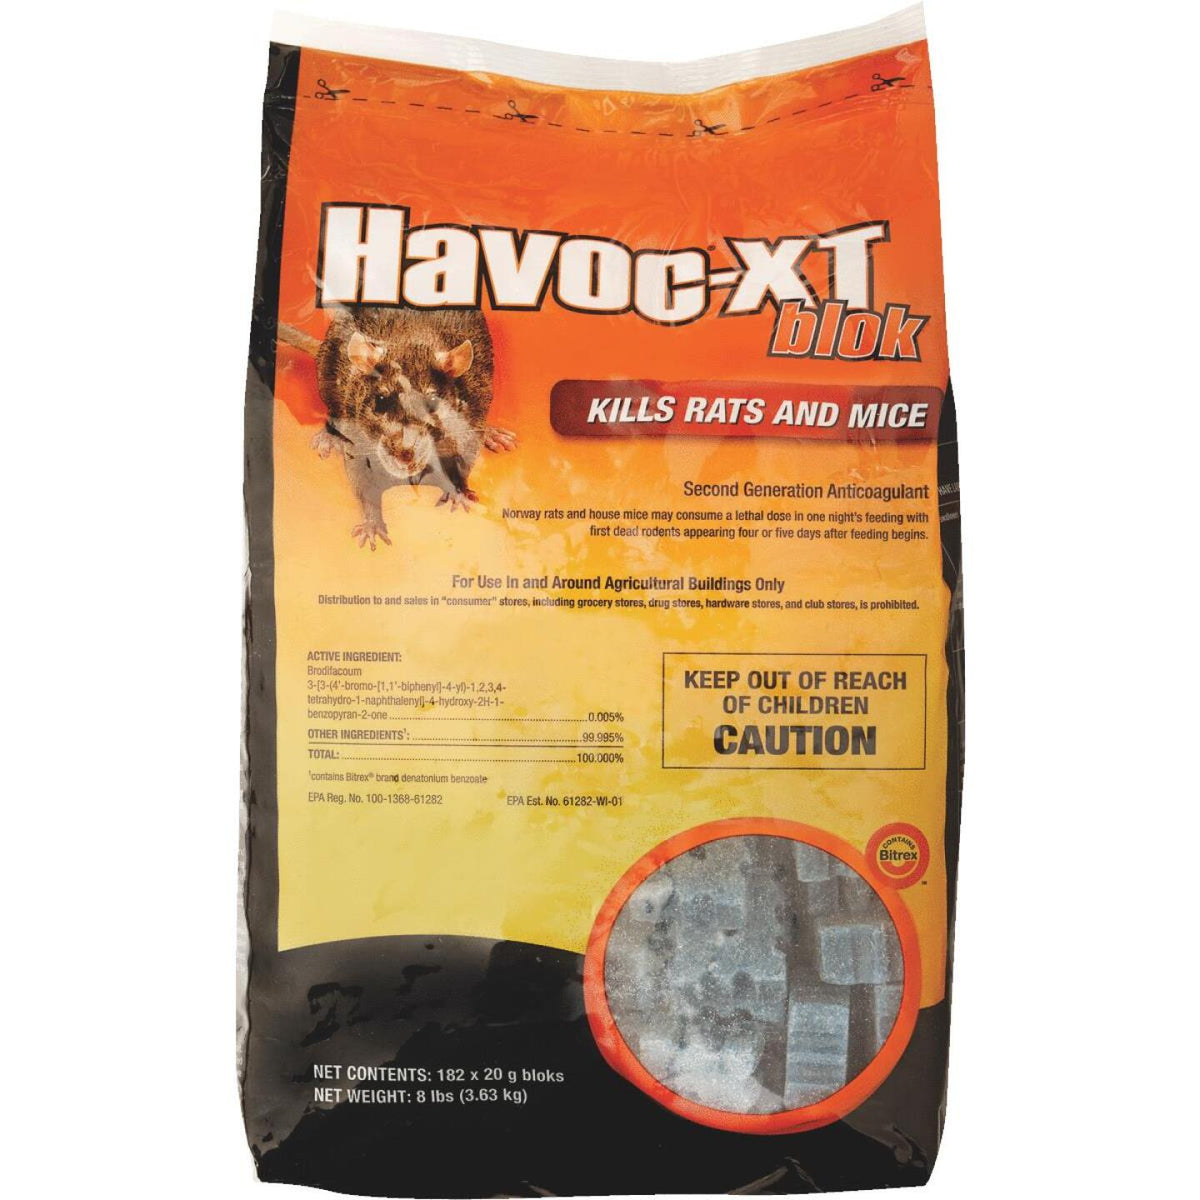 Havoc Bait Pellet Throw Pack For Mice and Rats 8.2 lb 40 pk